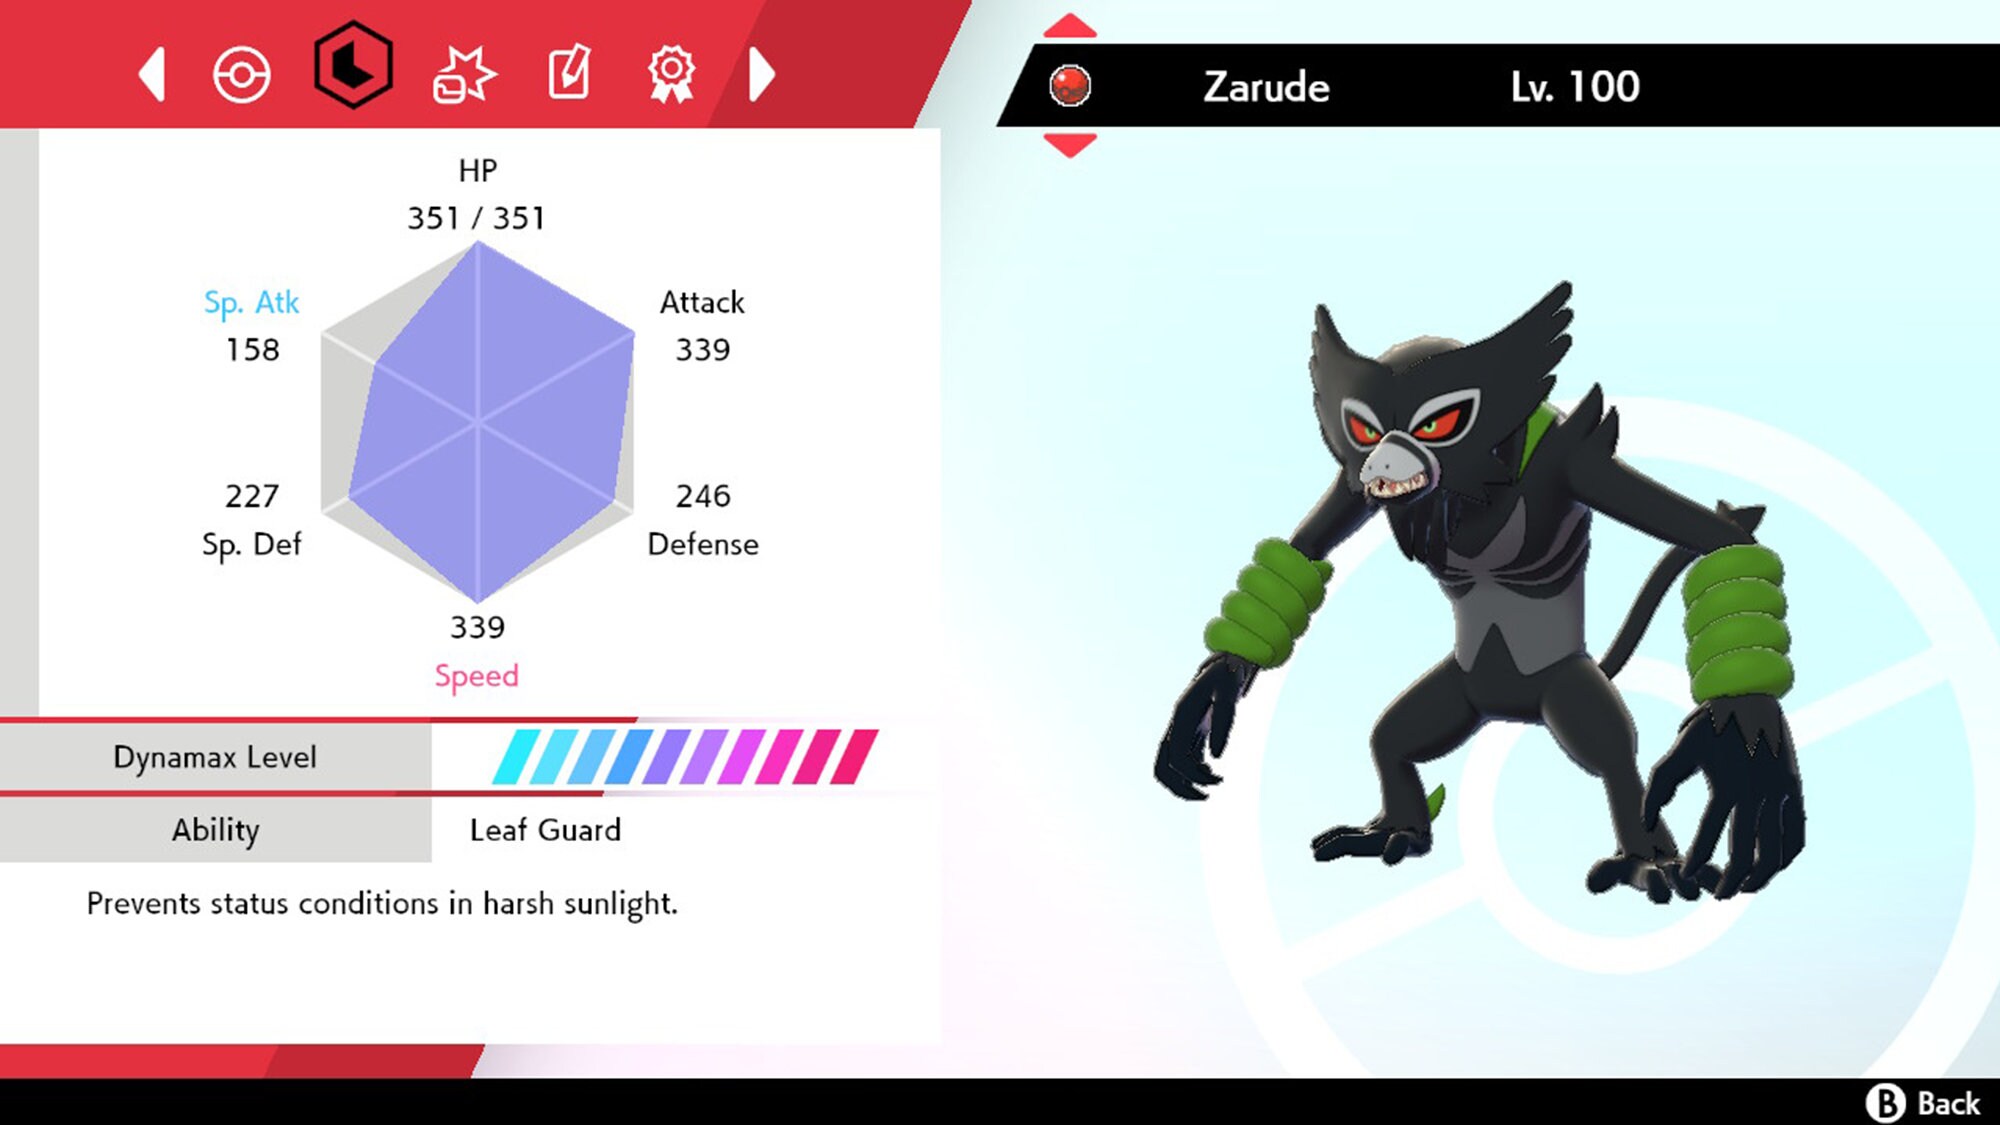 Pokemon Sword and Shield // ZARUDE Events BOTH Forms 2pack 